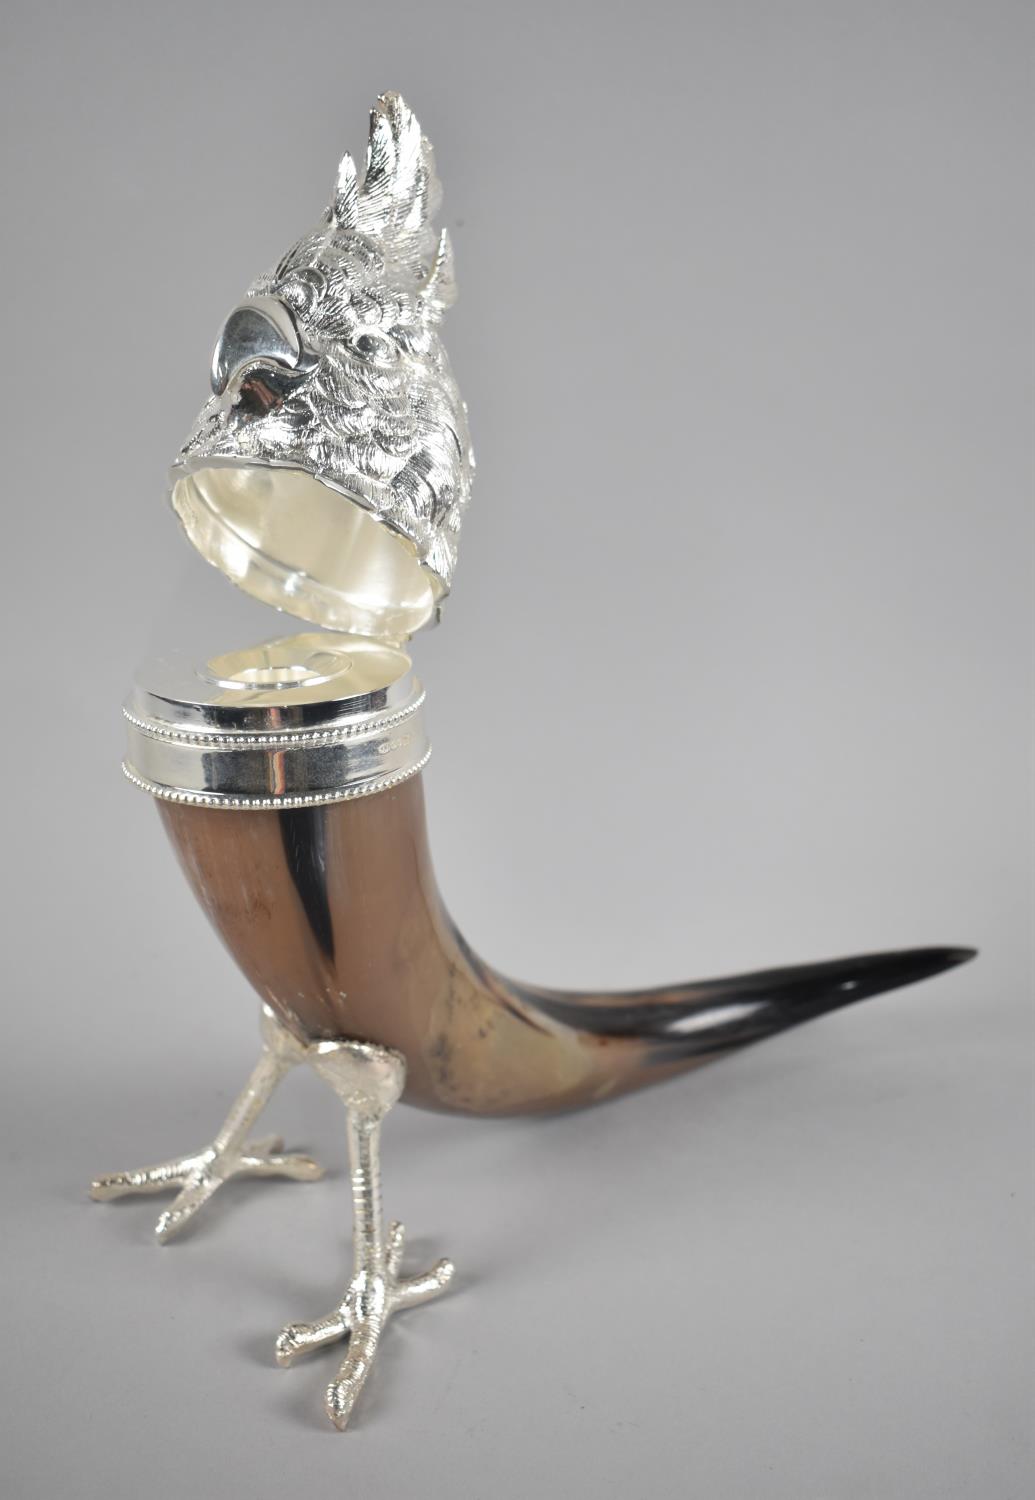 A Reproduction Silver Plate Mounted Novelty Desk Top Inkwell, Formed from a Cow Horn with Silver - Image 2 of 2